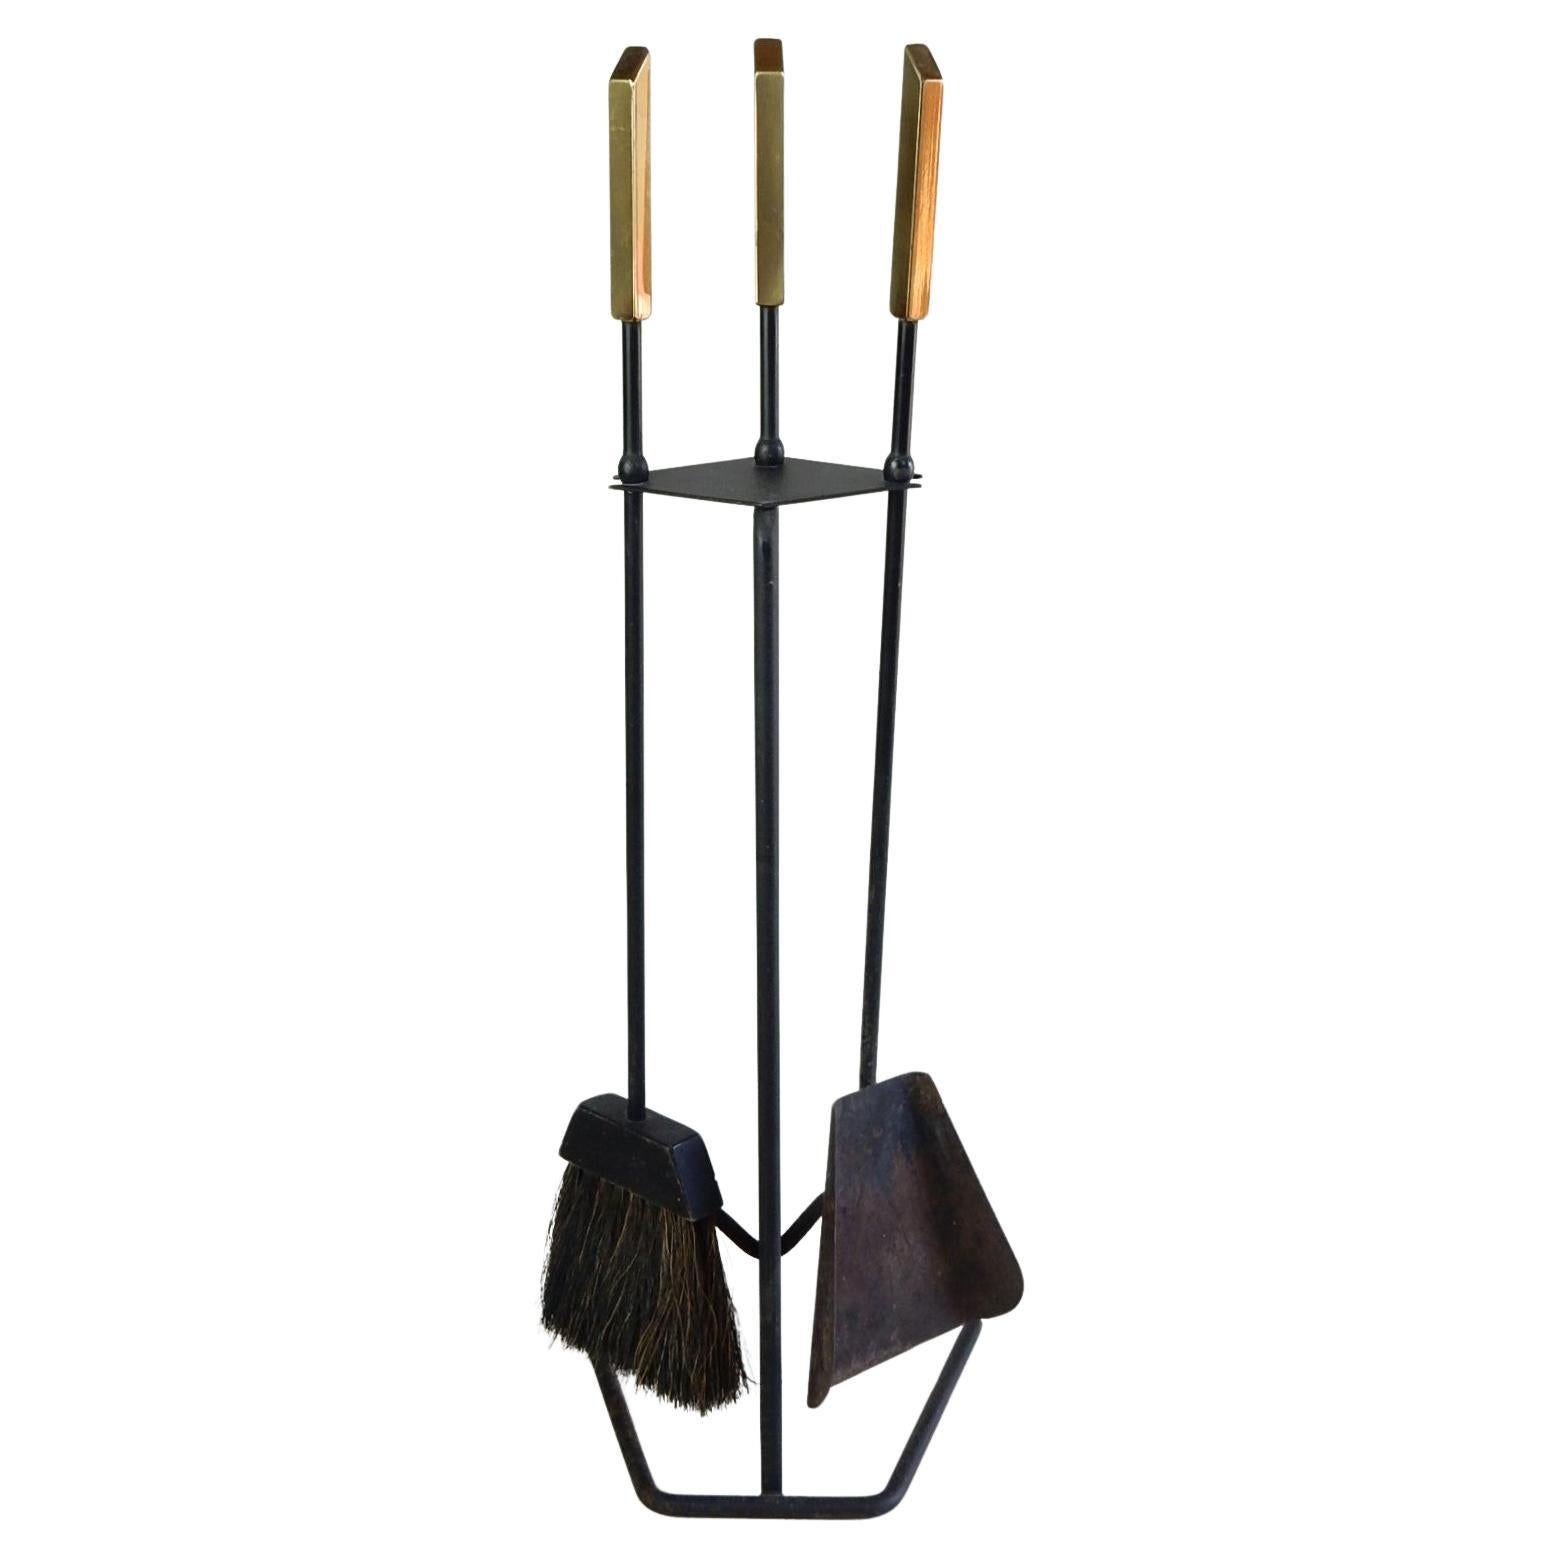 Blackened iron and brass handle 3 pc. fireplace tool set from the 1960's.
Well crafted and in amazing original condition. True horsehair broom.